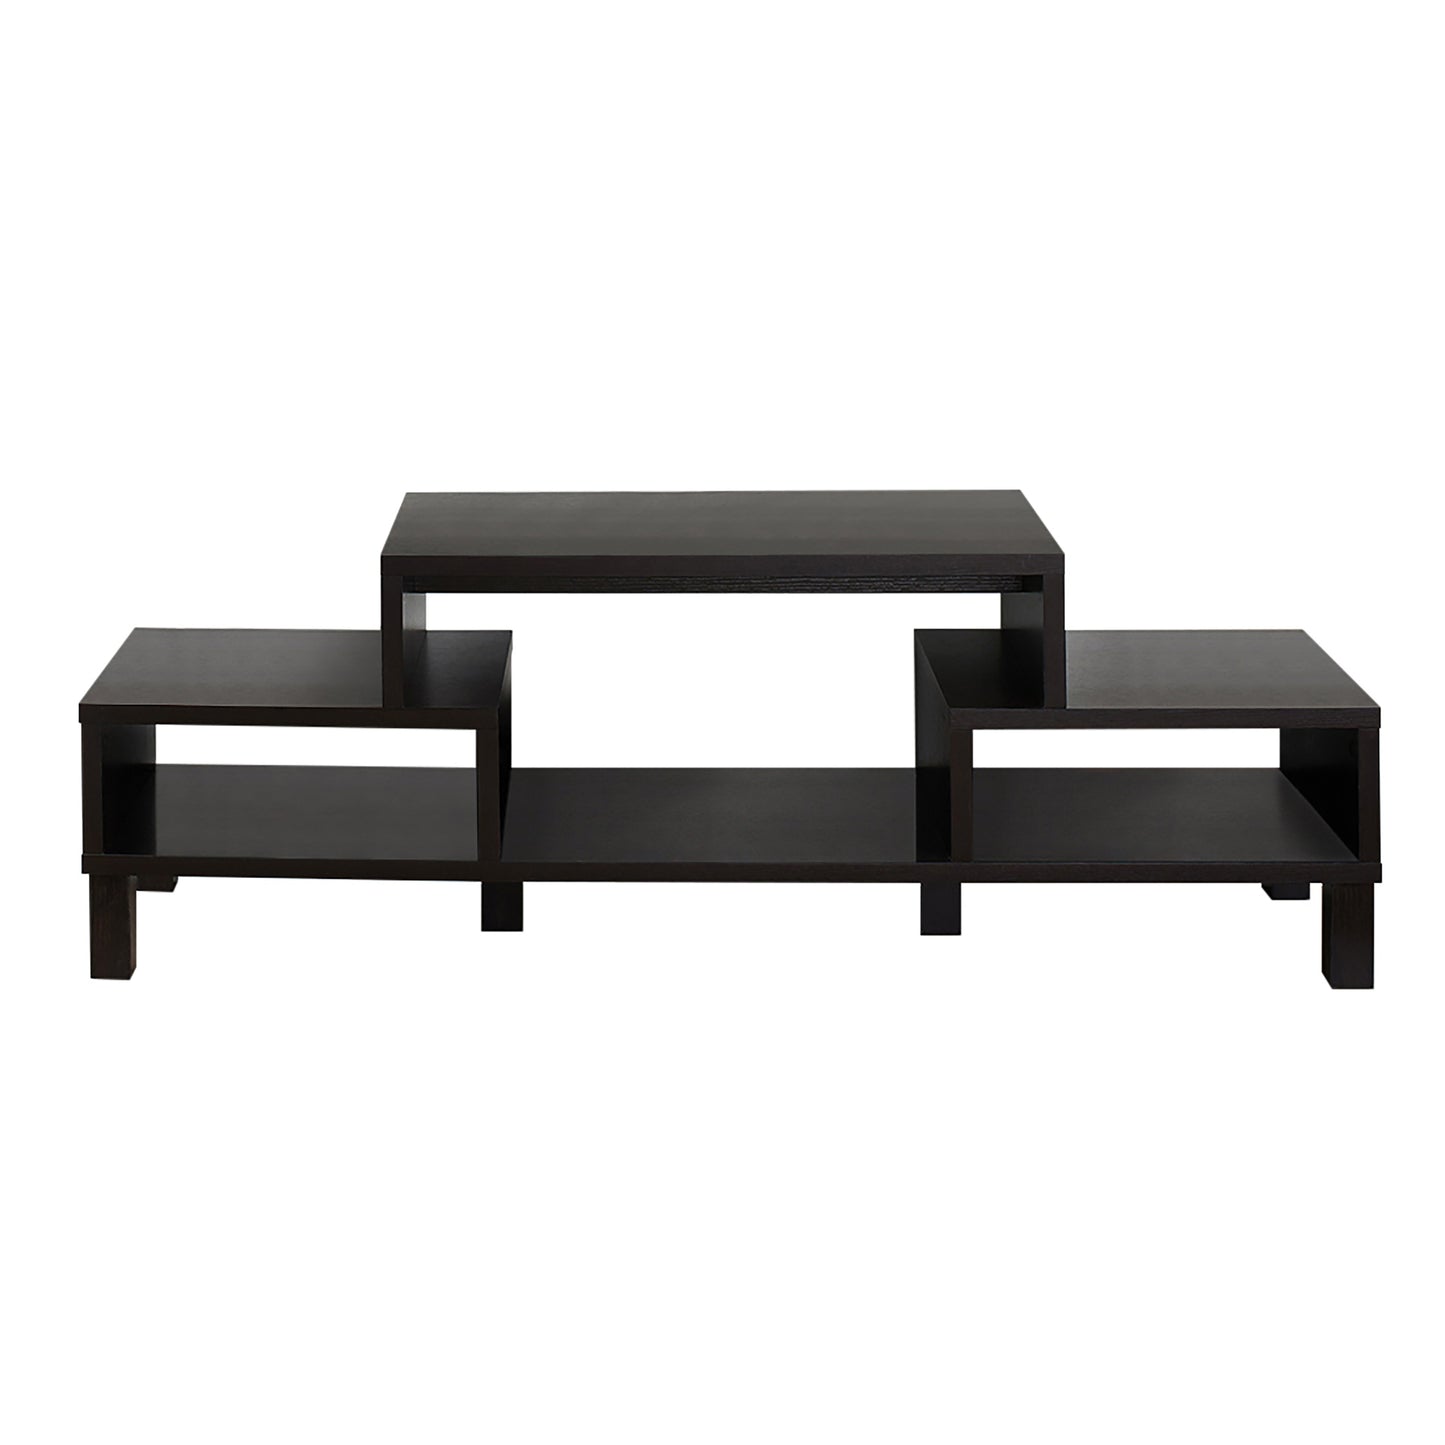 Denis Contemporary 60-Inch TV Stand